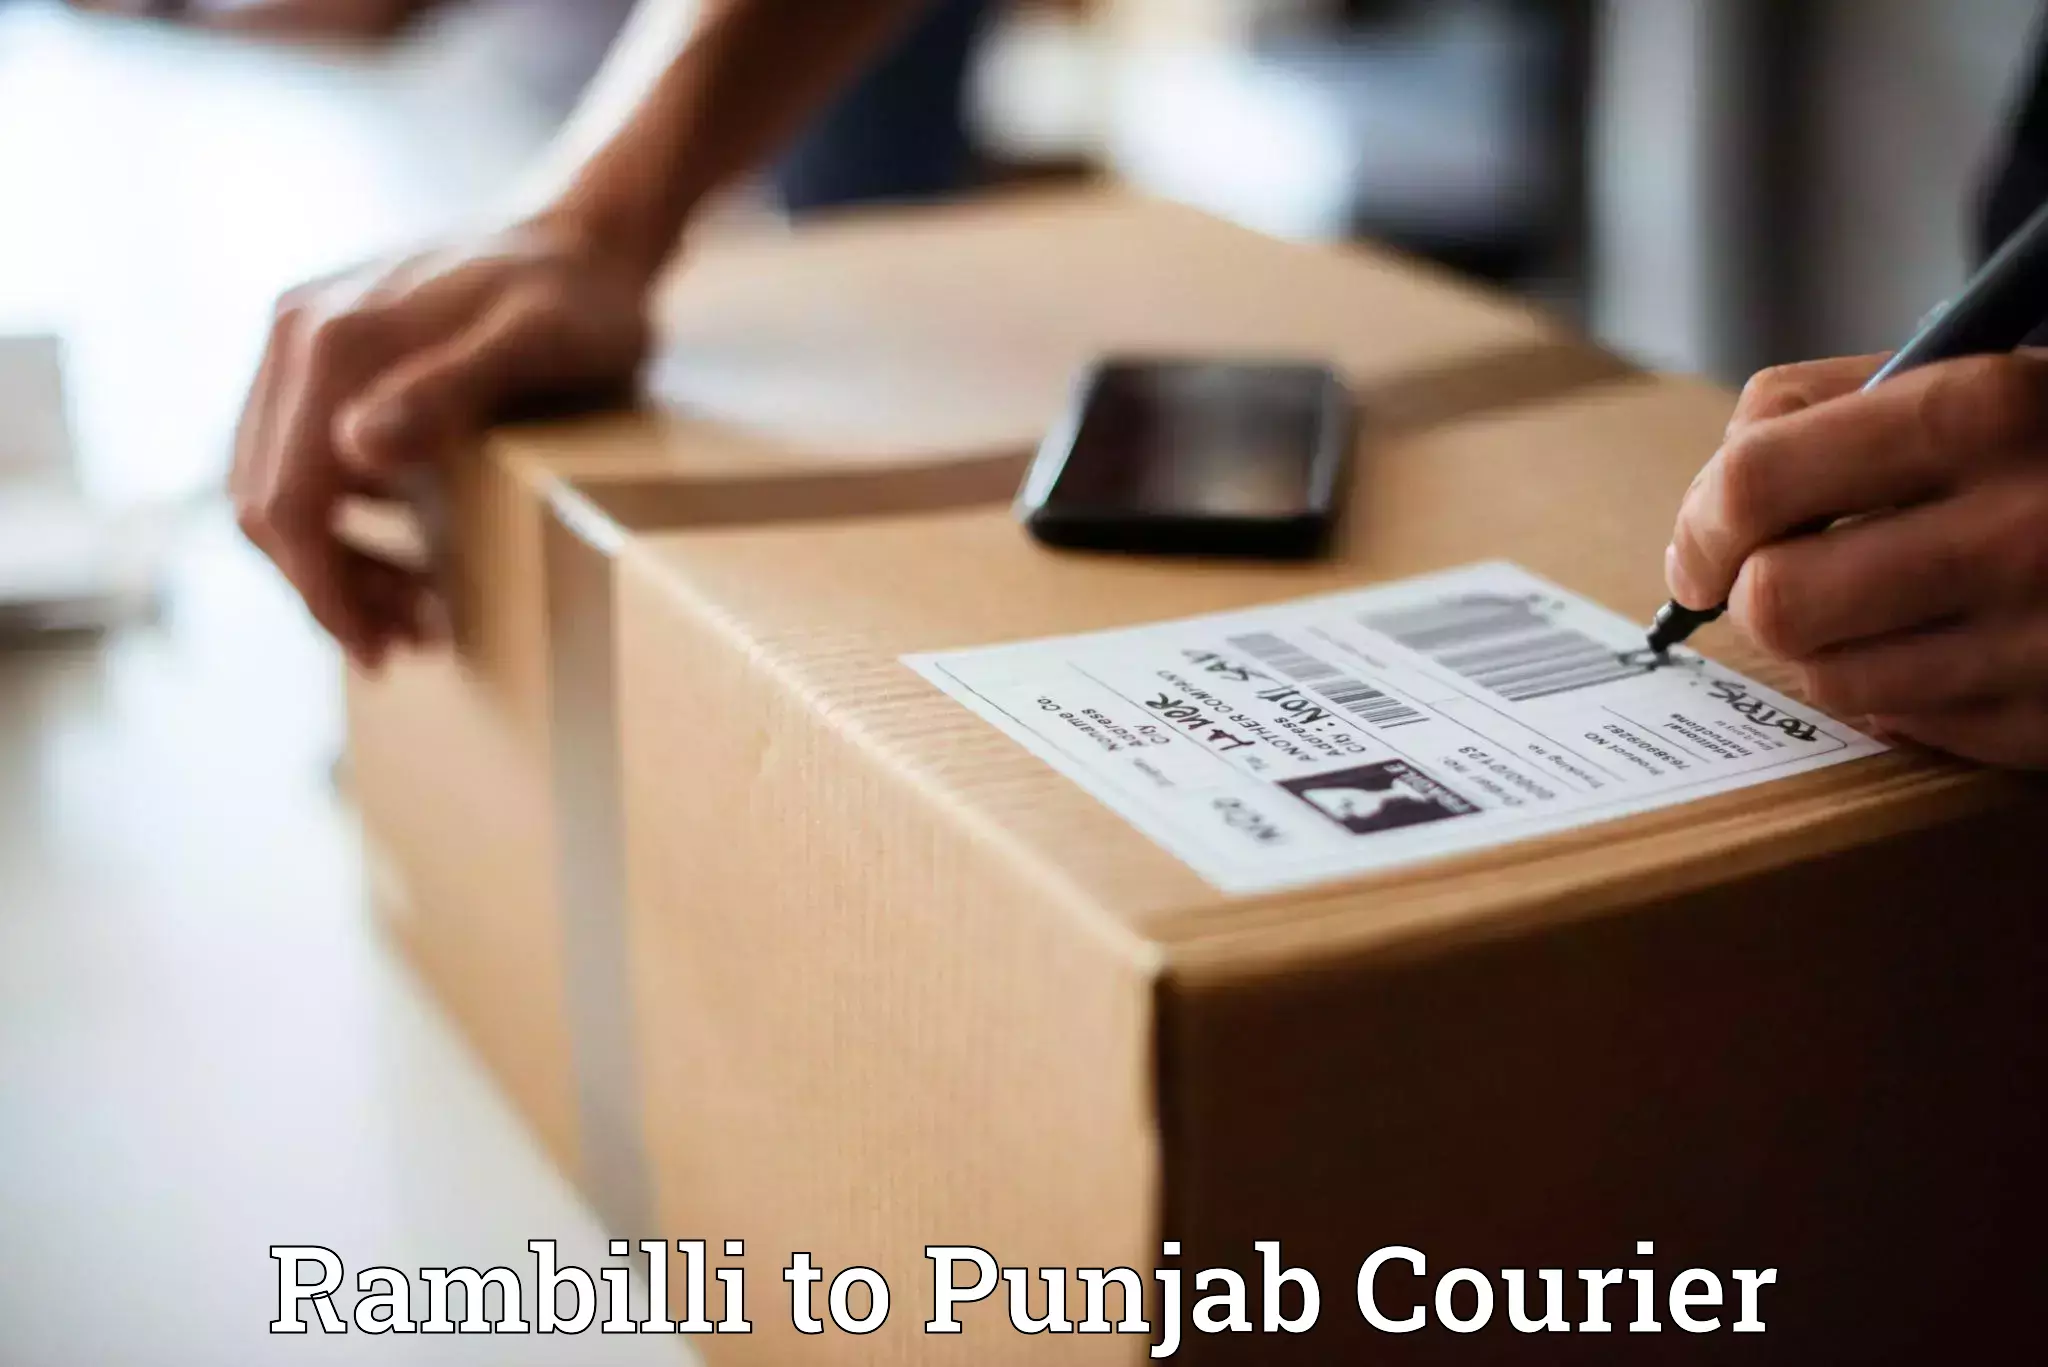 Courier service innovation Rambilli to Punjab